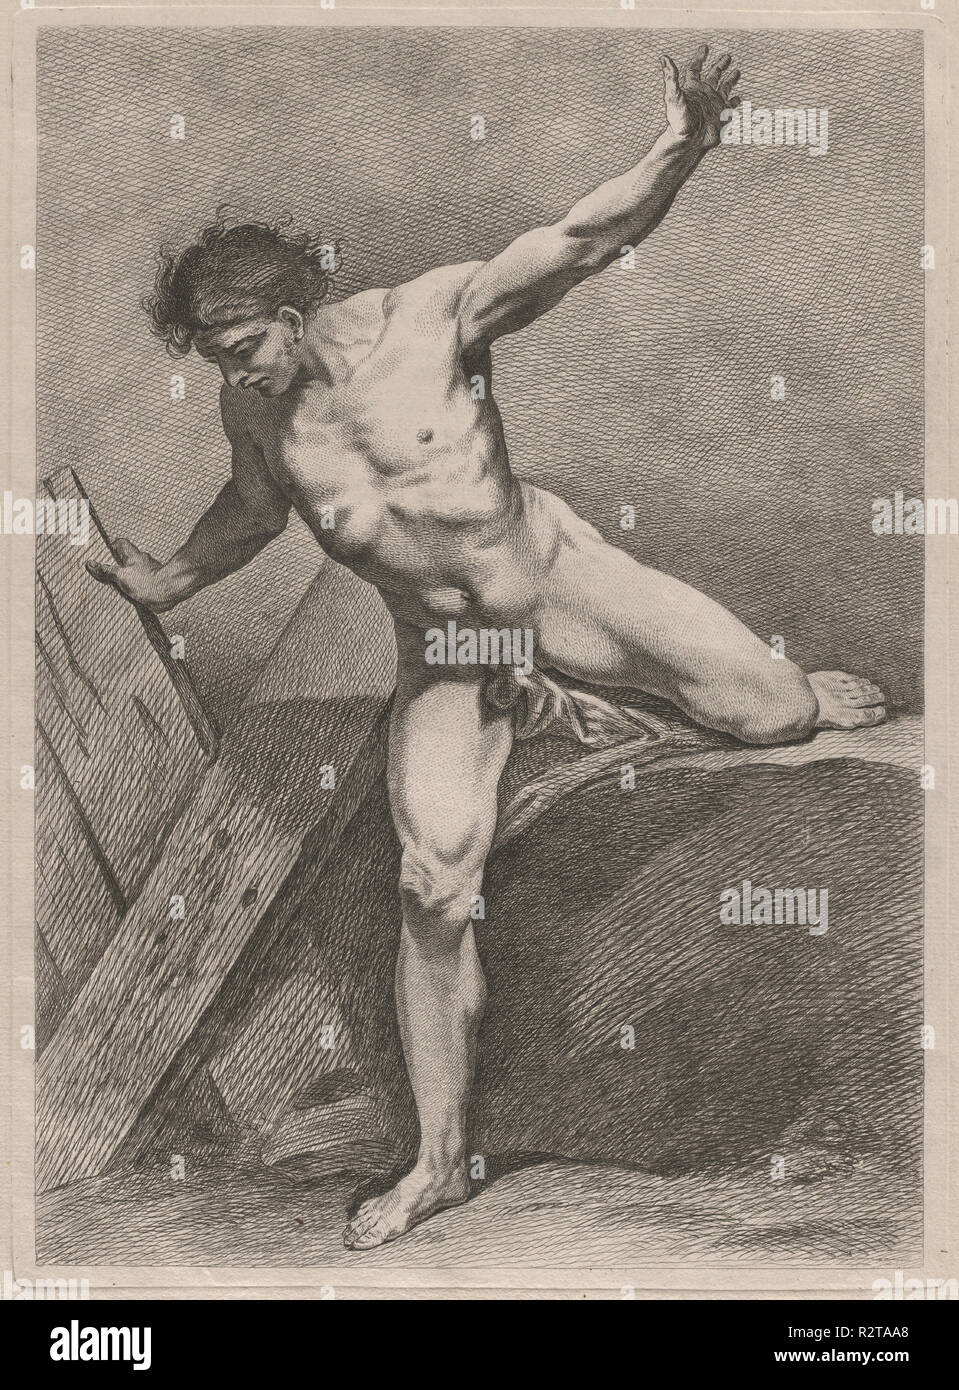 Climbing Man with Arms Outstretched. Dated: c. 1743. Dimensions: sheet: 50 × 34 cm (19 11/16 × 13 3/8 in.) [irregular]  plate: 39 × 28.5 cm (15 3/8 × 11 1/4 in.). Medium: etching on laid paper. Museum: National Gallery of Art, Washington DC. Author: Carle Van Loo. Carle (Charles André) Vanloo. Stock Photo